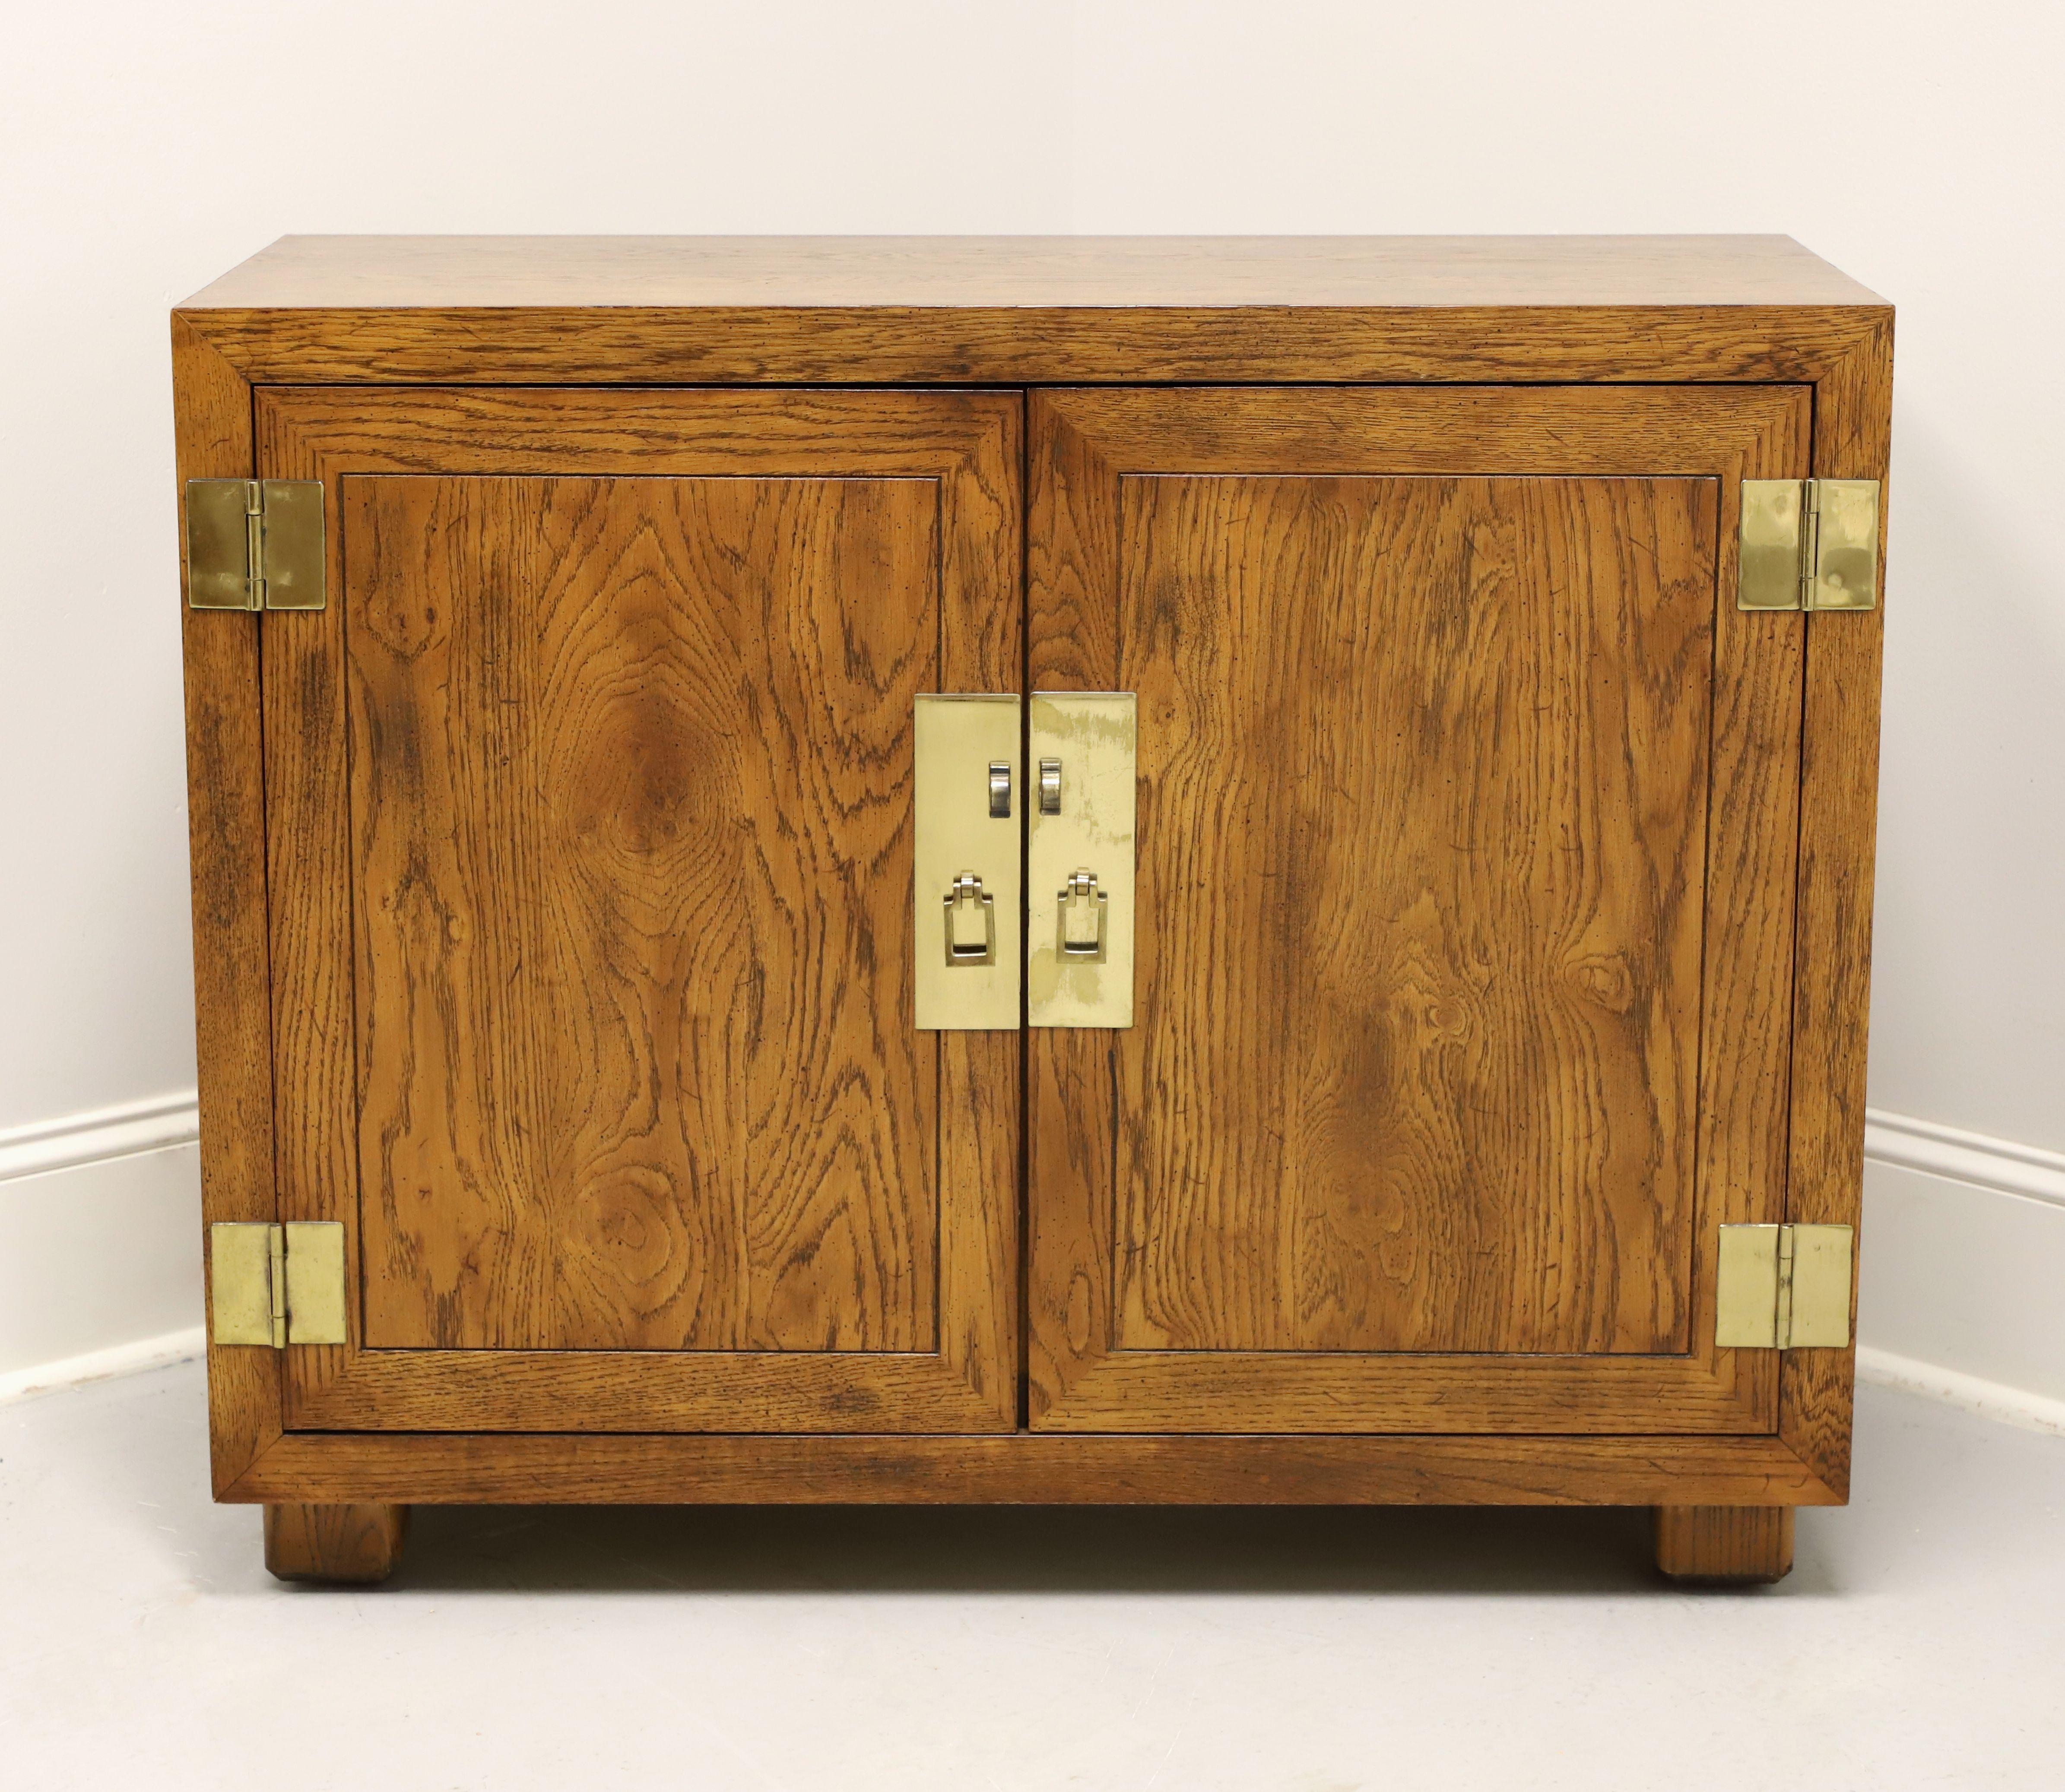 A Campaign style console cabinet by Henredon, from their Artefacts Collection. Knotty oak with slightly distressed finish, banded door fronts, smooth surface top, brass hardware, and block feet. Features a two door cabinet revealing one drawer of